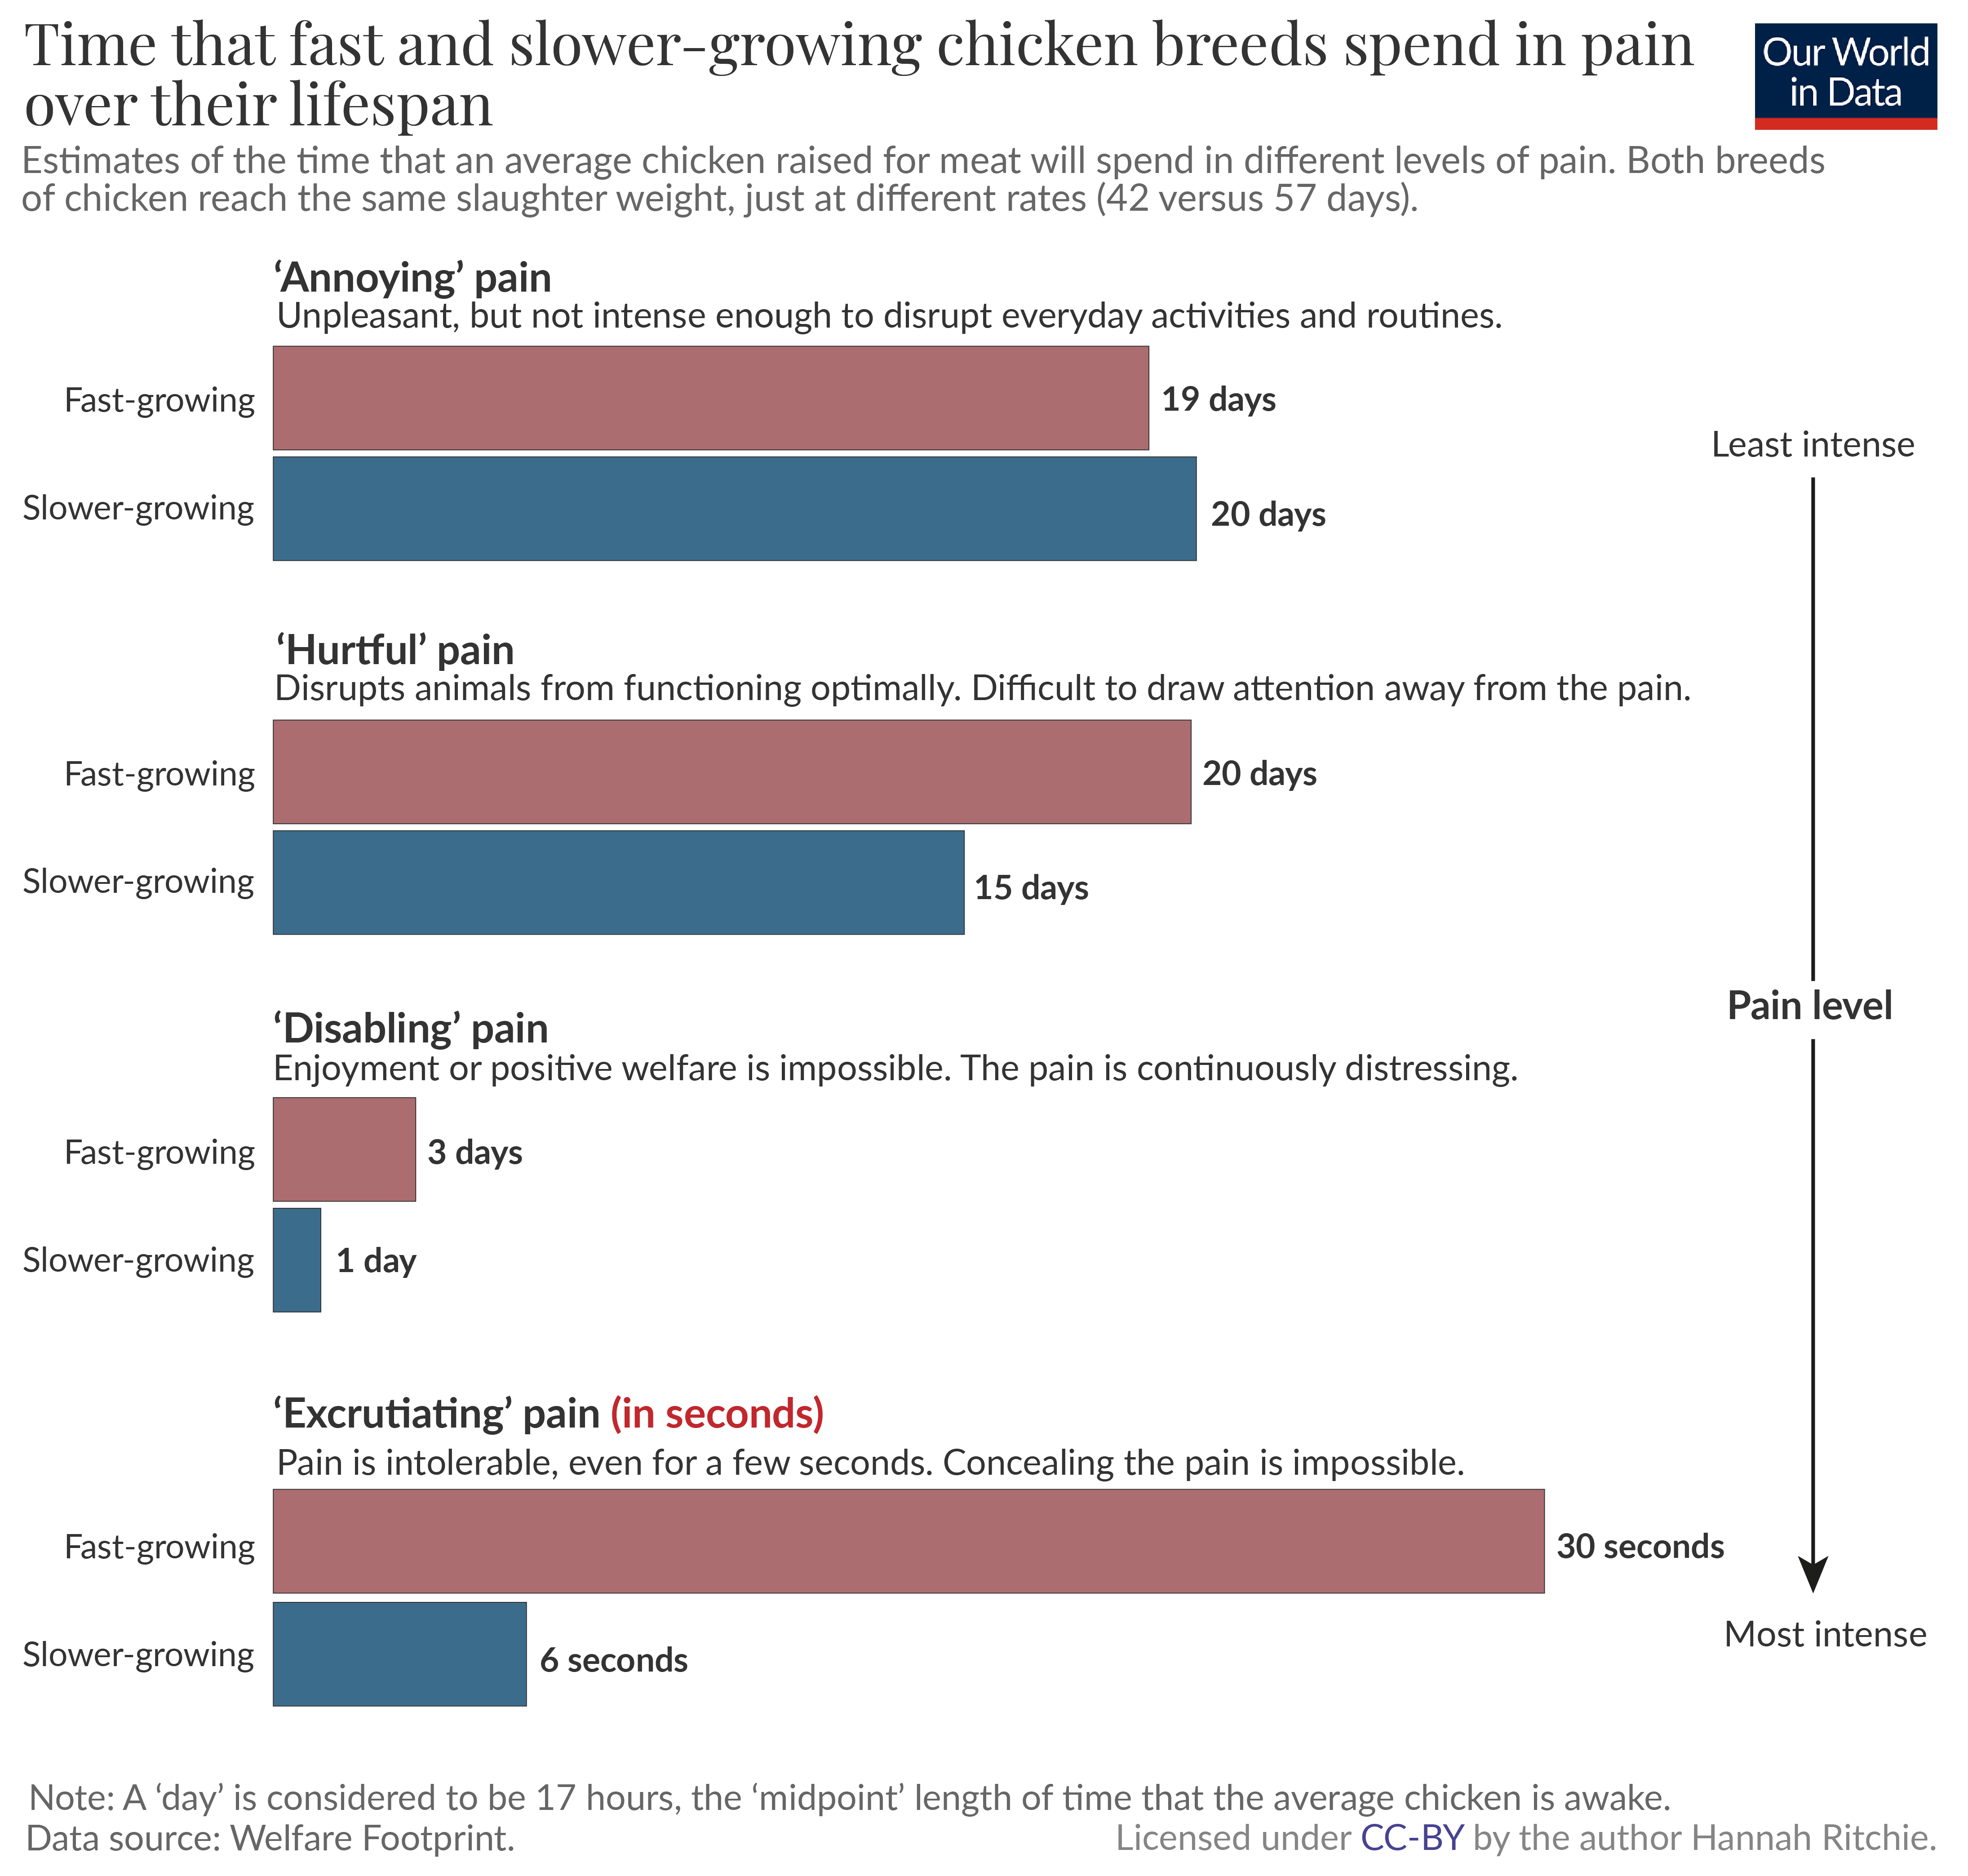 Grouped bar chart showing levels of pain in fast- and slower-growing chicken breeds. For all levels of pain, except 'annoying' pain, fast-growing breeds experience more days.